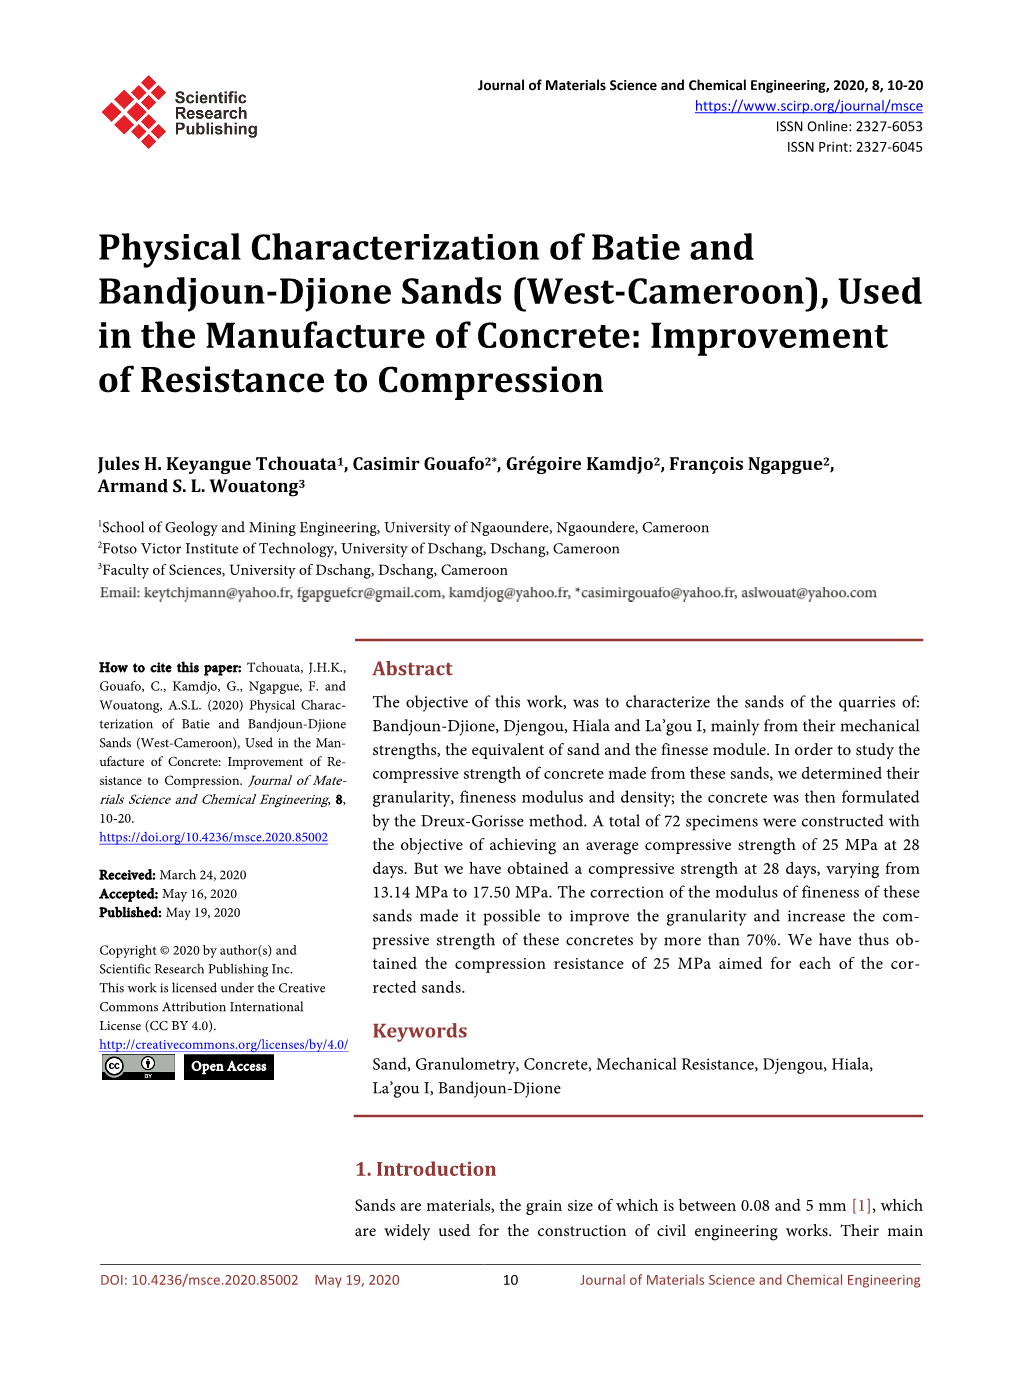 Physical Characterization of Batie and Bandjoun-Djione Sands (West-Cameroon), Used in the Manufacture of Concrete: Improvement of Resistance to Compression